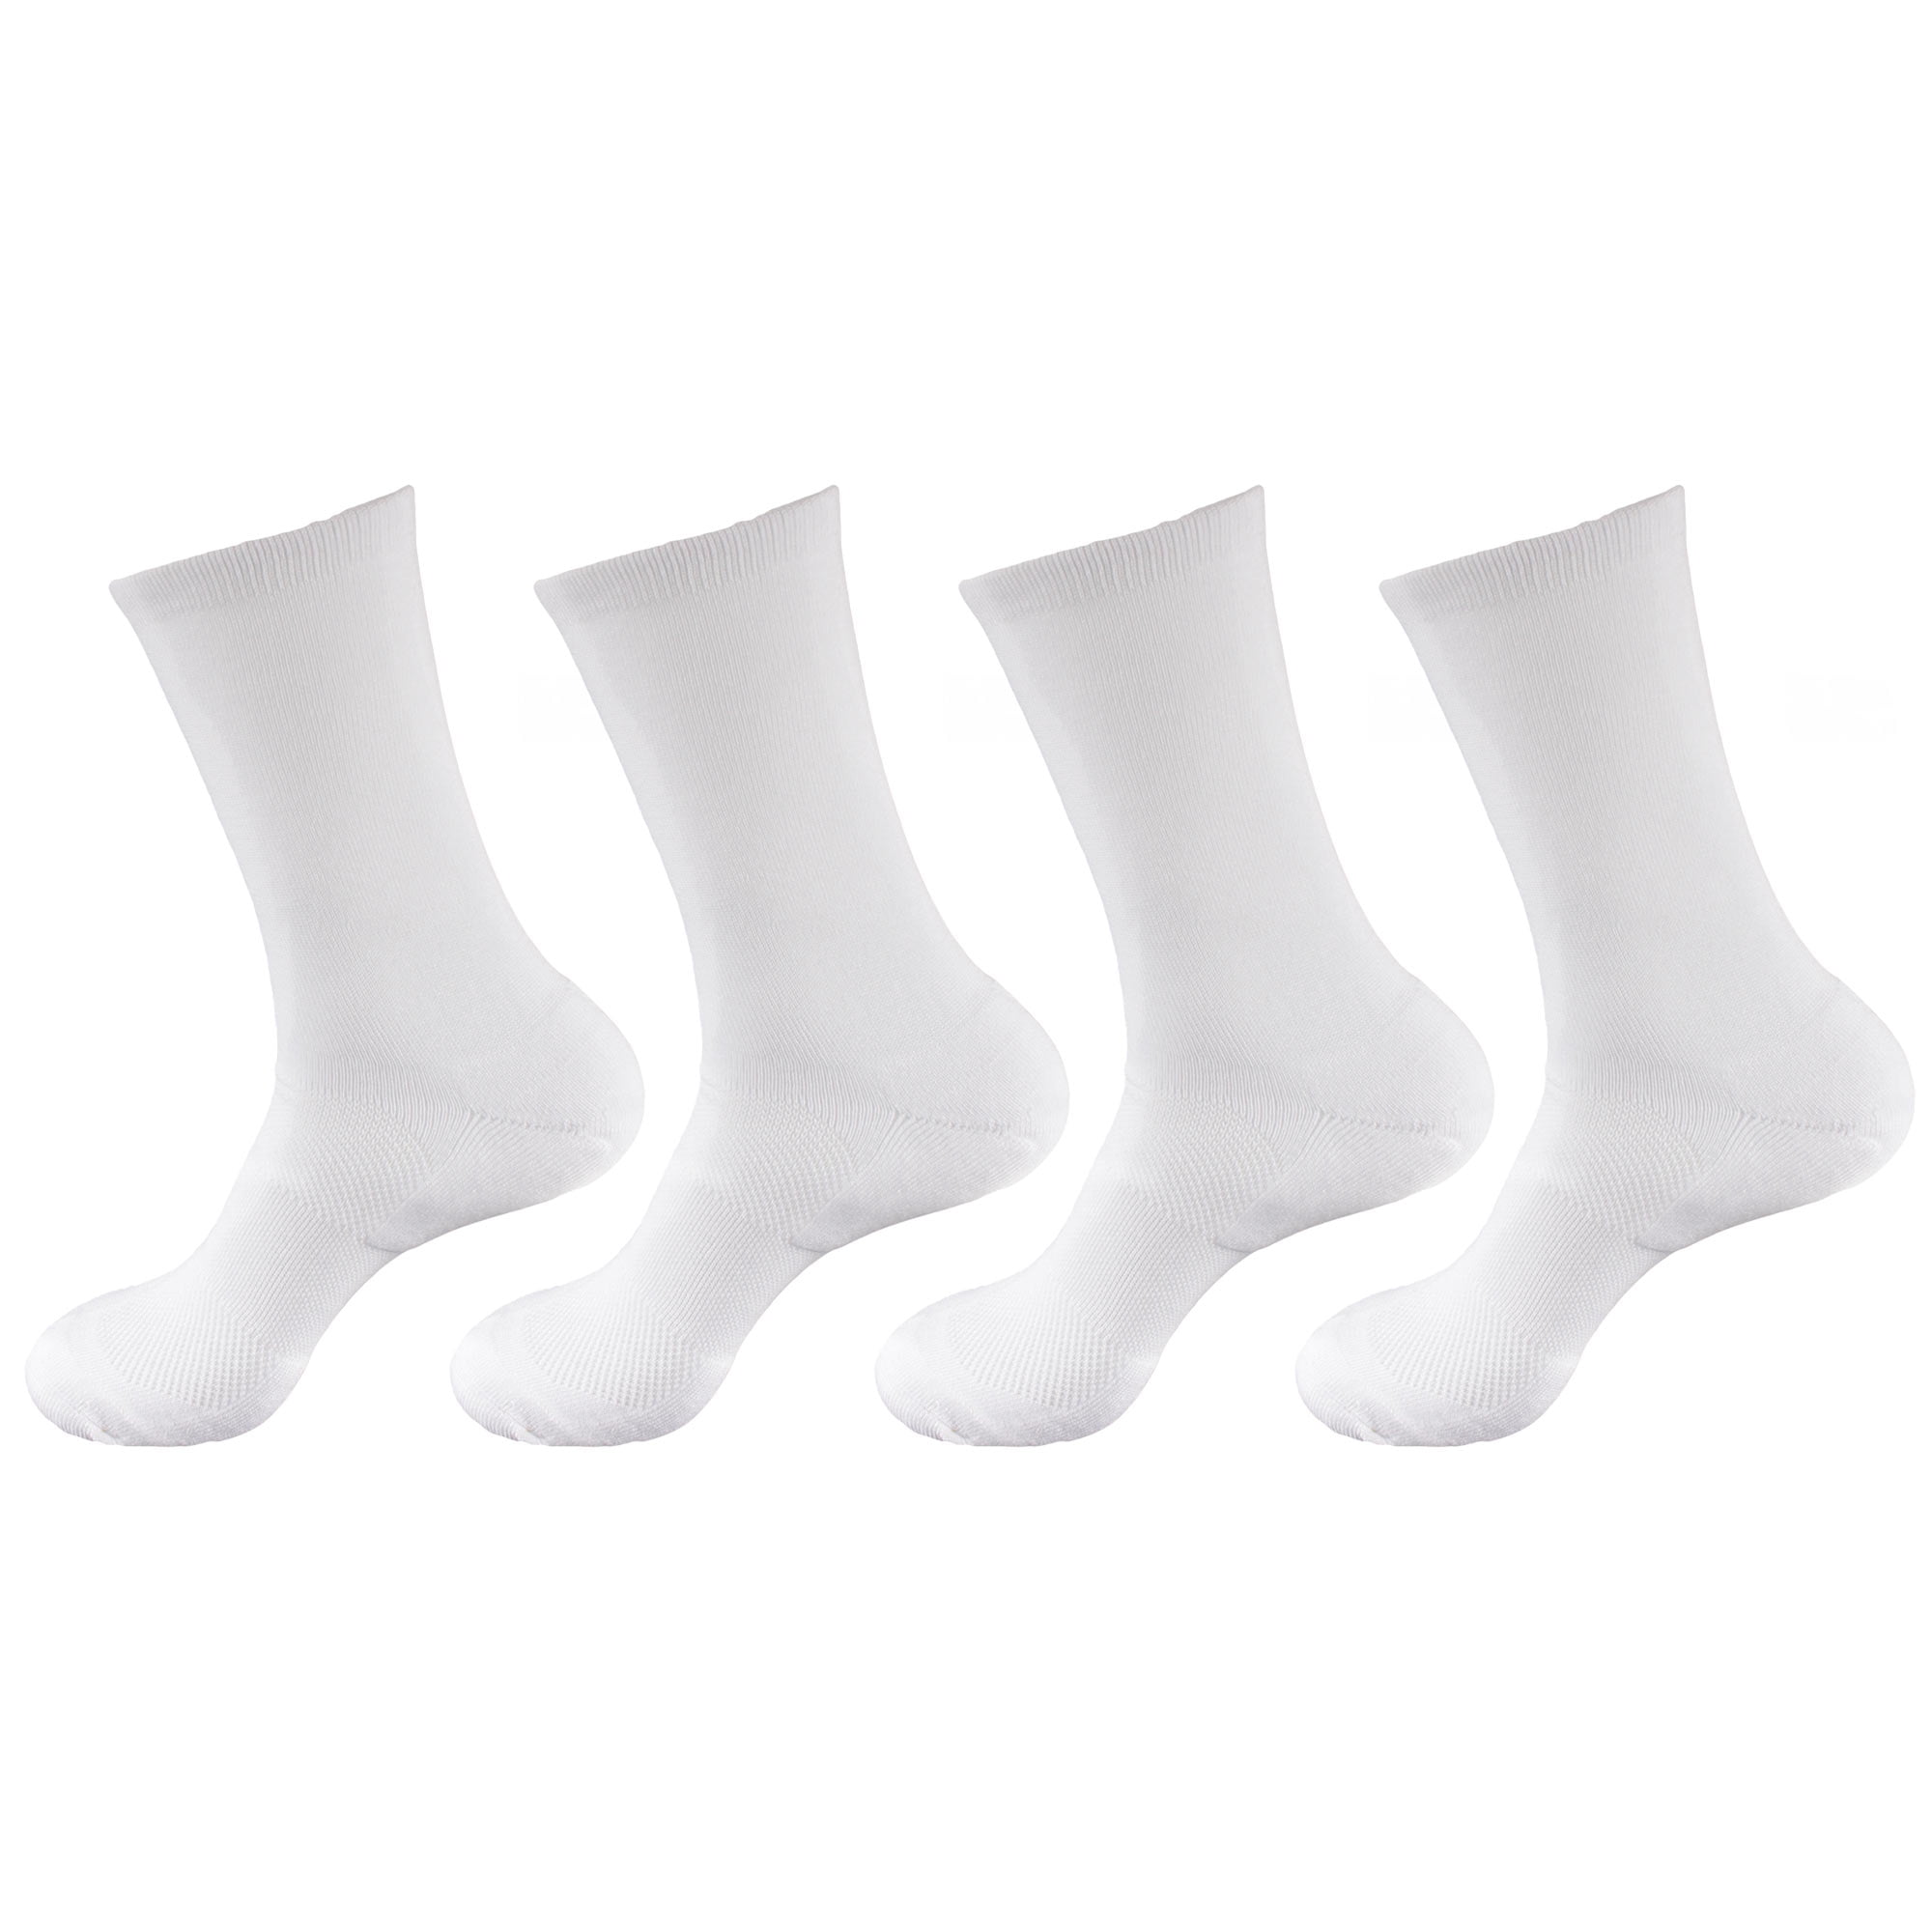 Mens Rayon from Bamboo Fiber Ultra Breathable Wicking Supported Toe and Heel Crew Socks